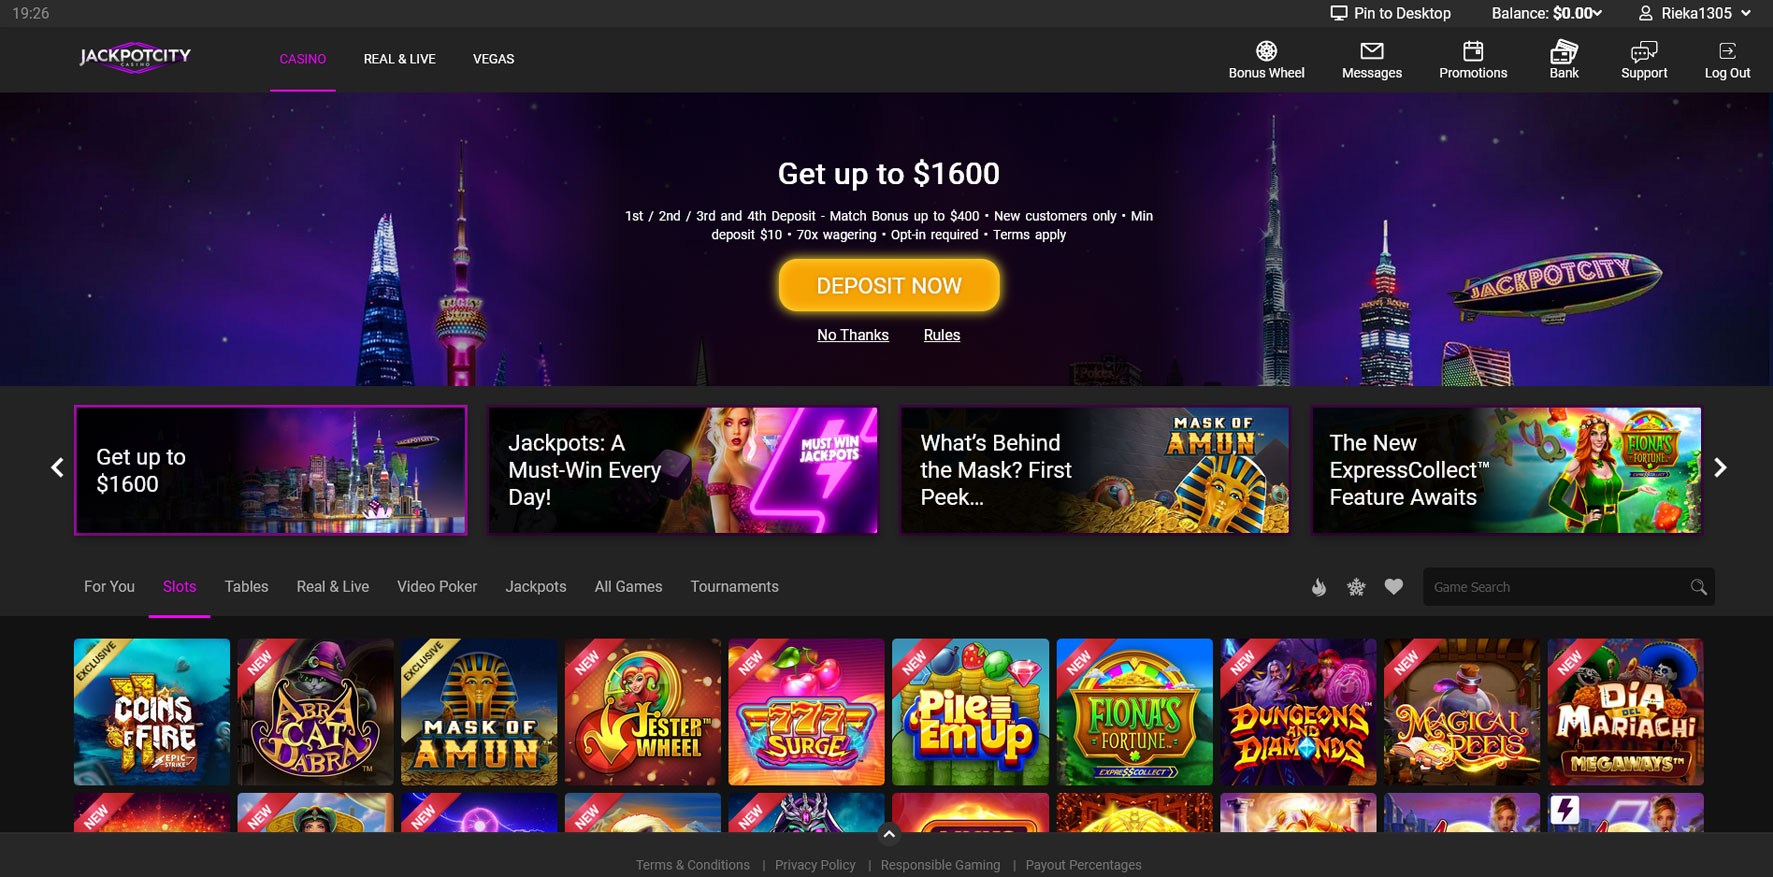 How To Find The Time To online casino On Facebook in 2021